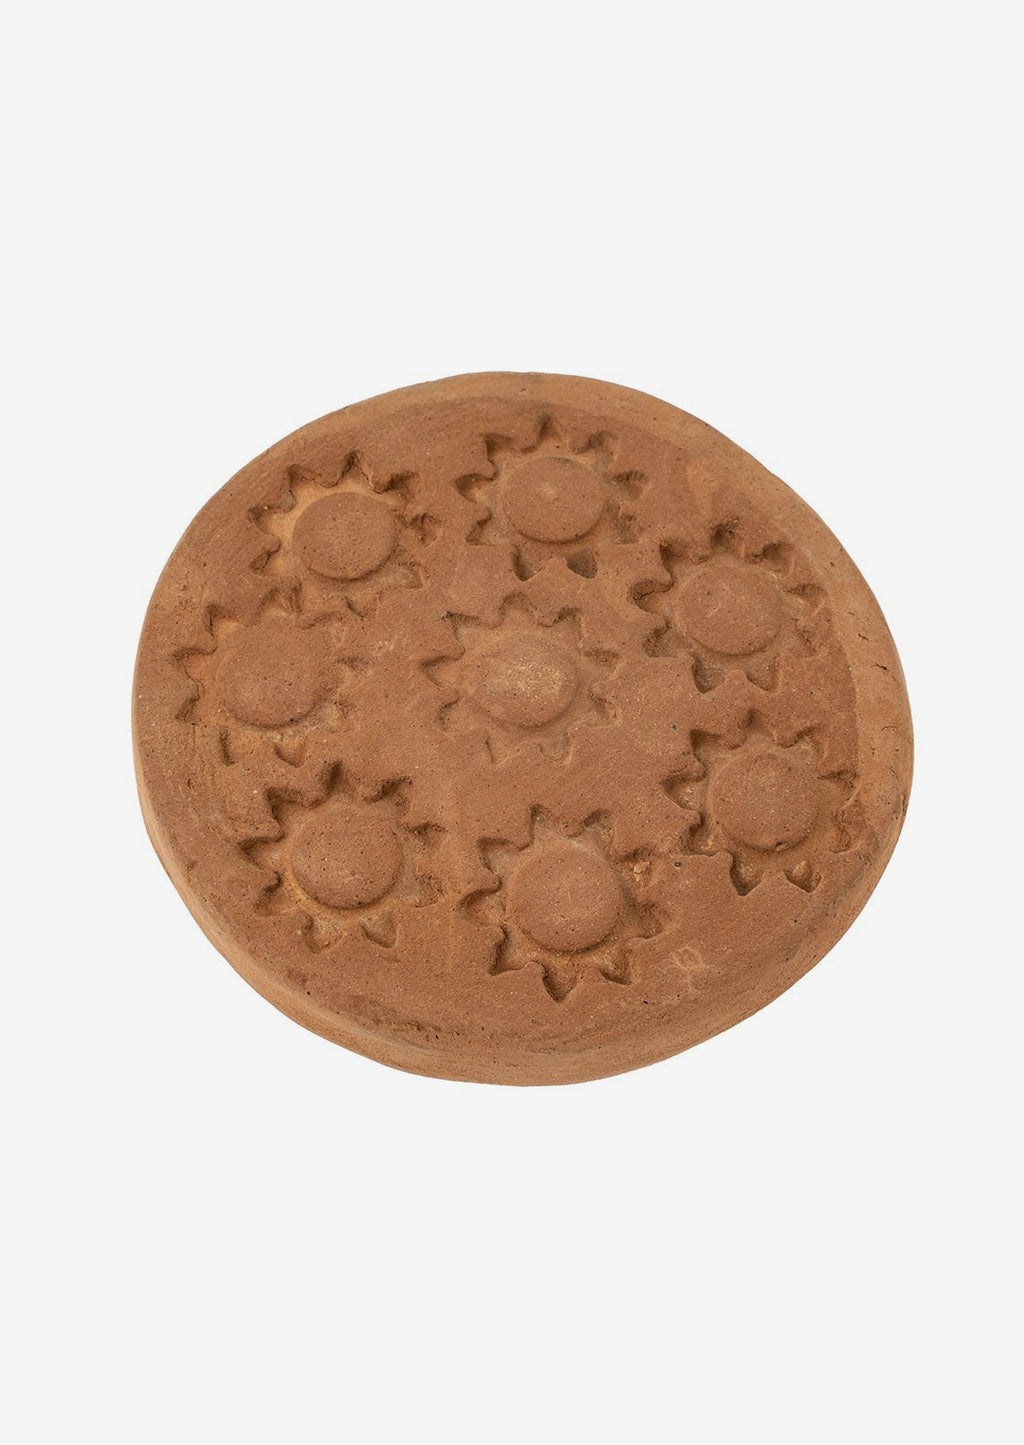 2: A round terracotta coaster with stamped sun pattern.